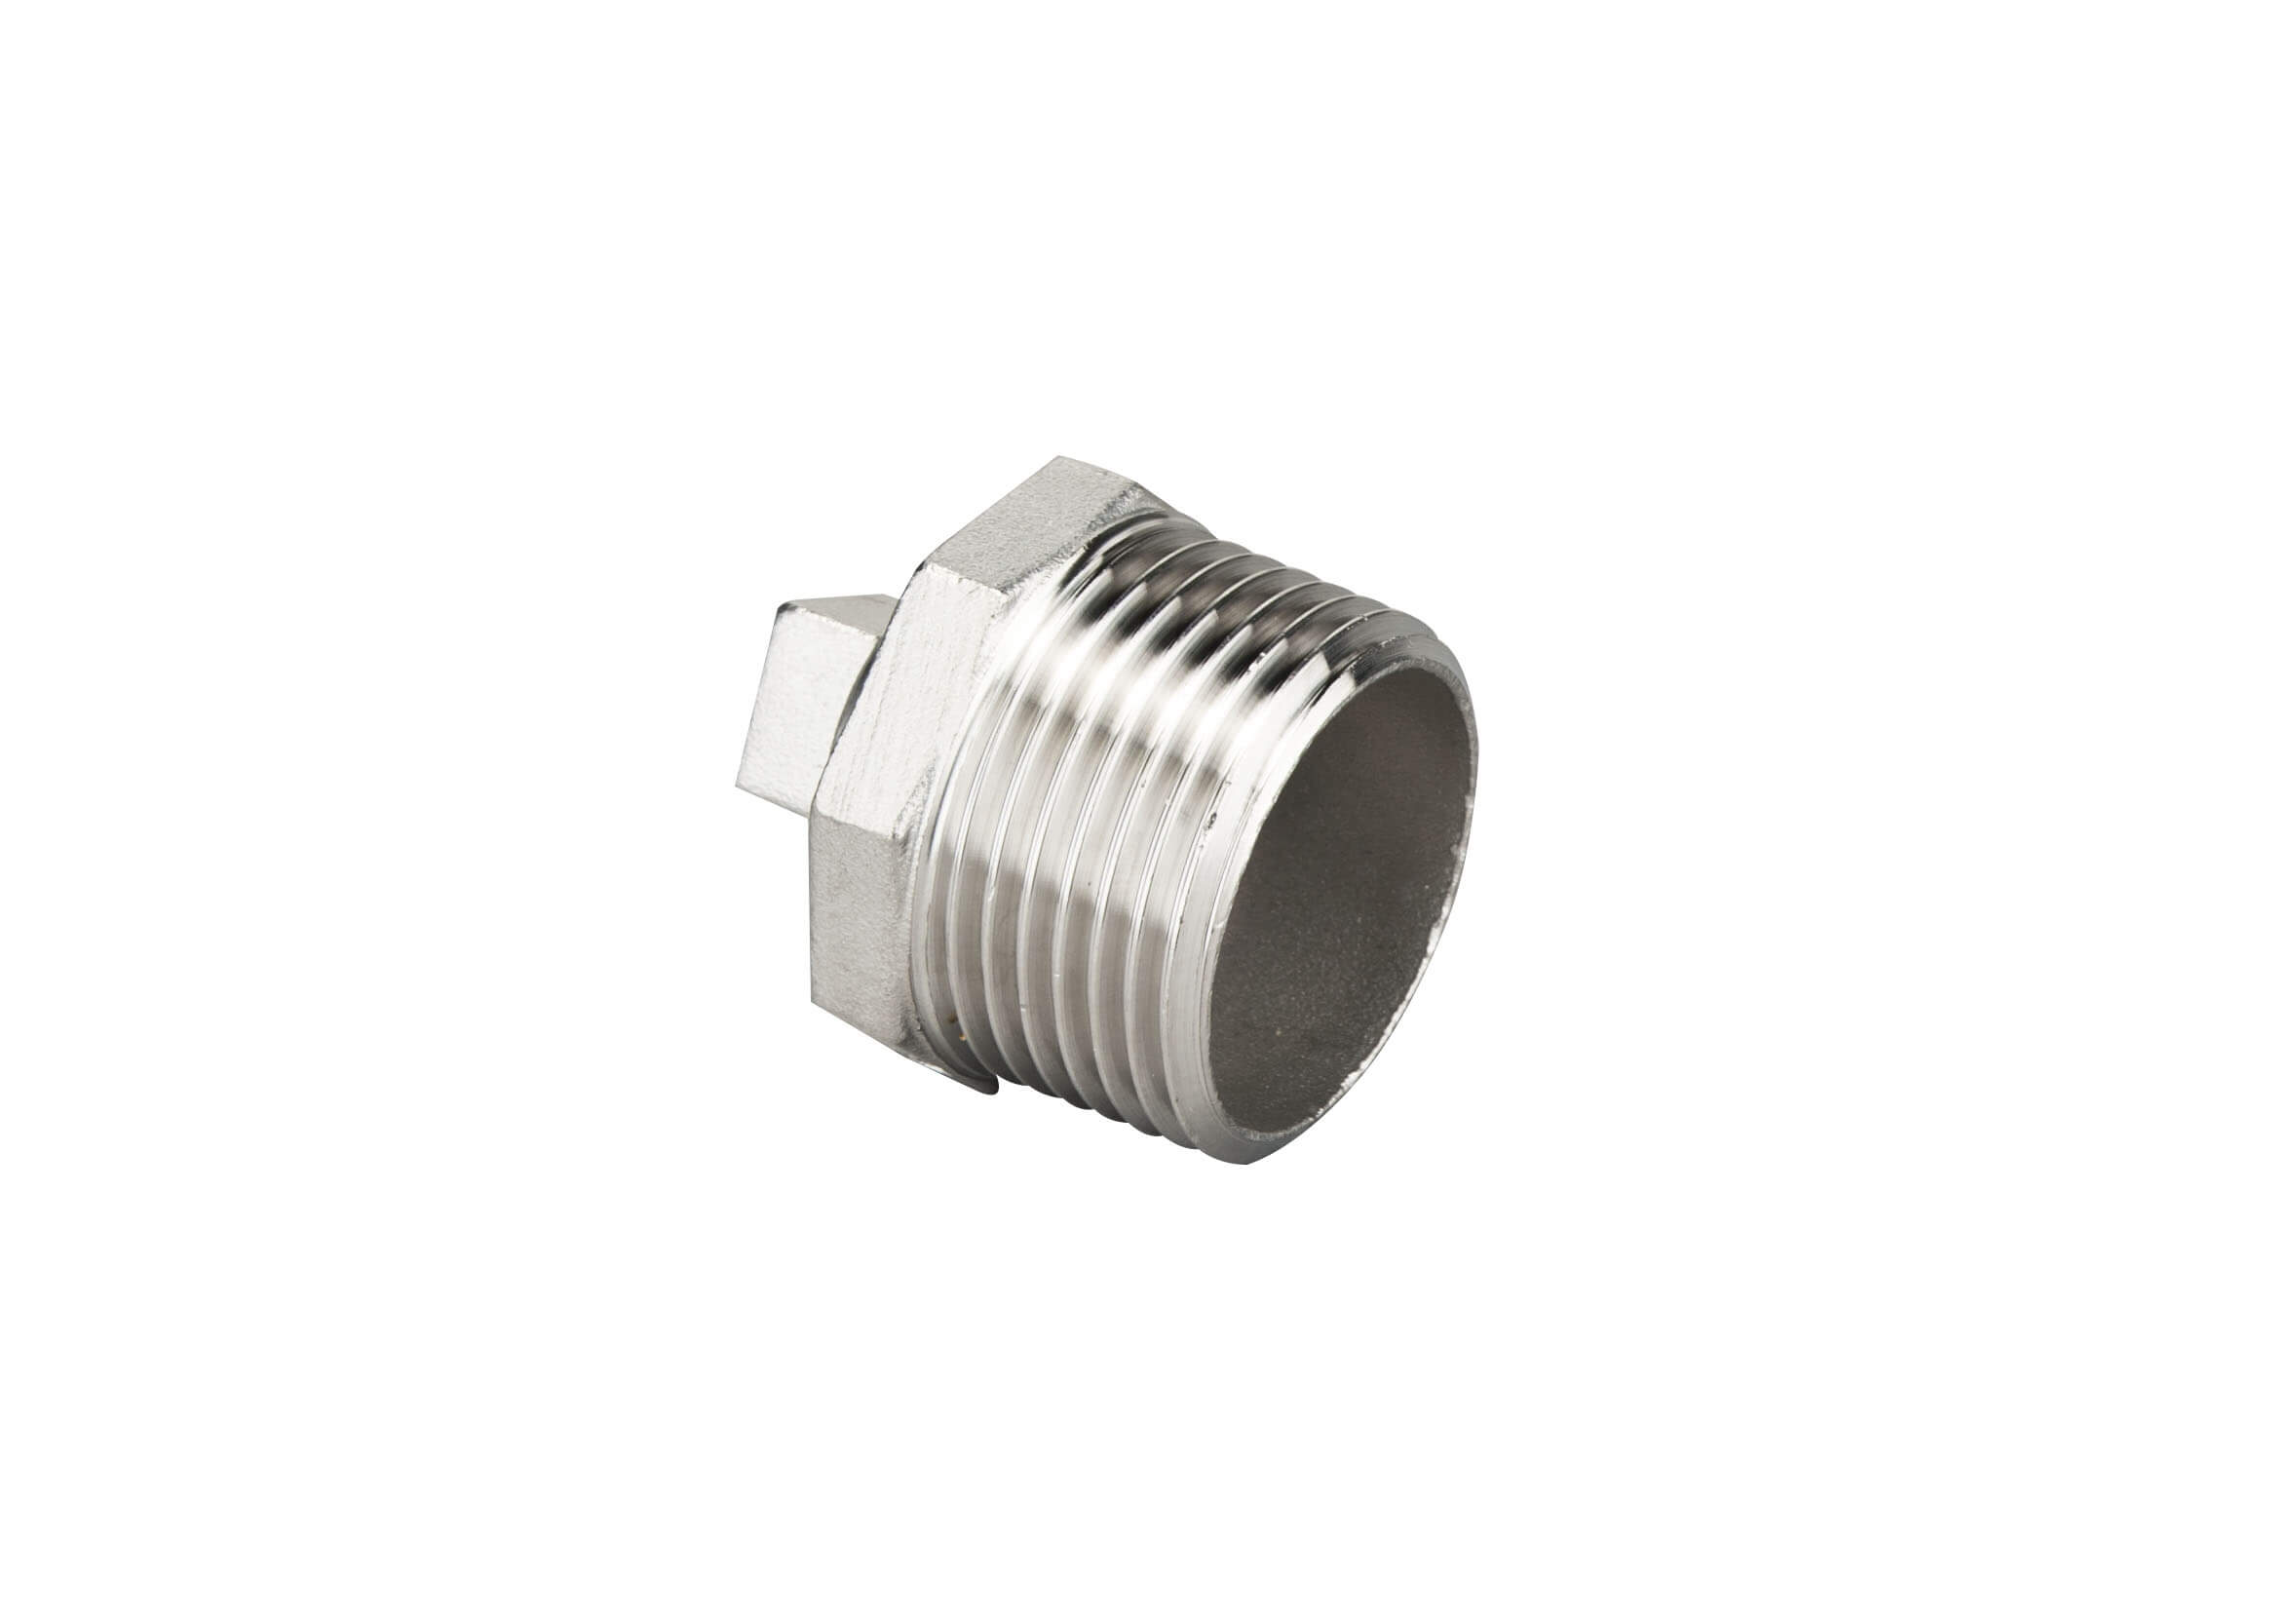 Square Plug, conical male thread (R), # 329, AISI 316, casted, sim. to DIN EN 10241:2000  (DIN 2991)